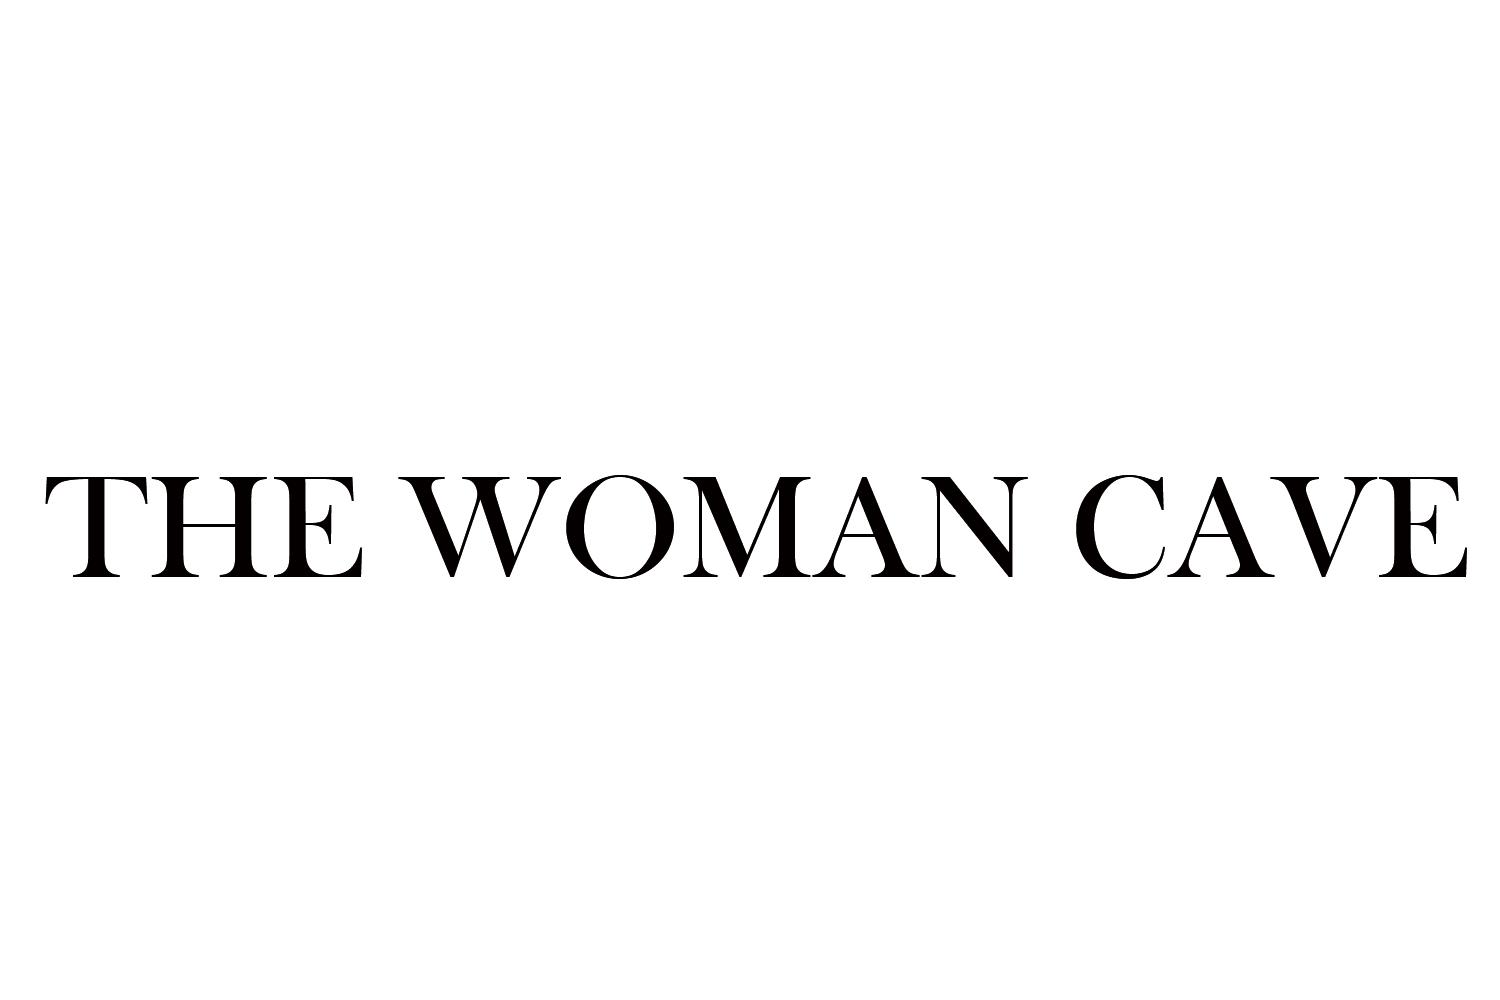 THE WOMAN CAVE